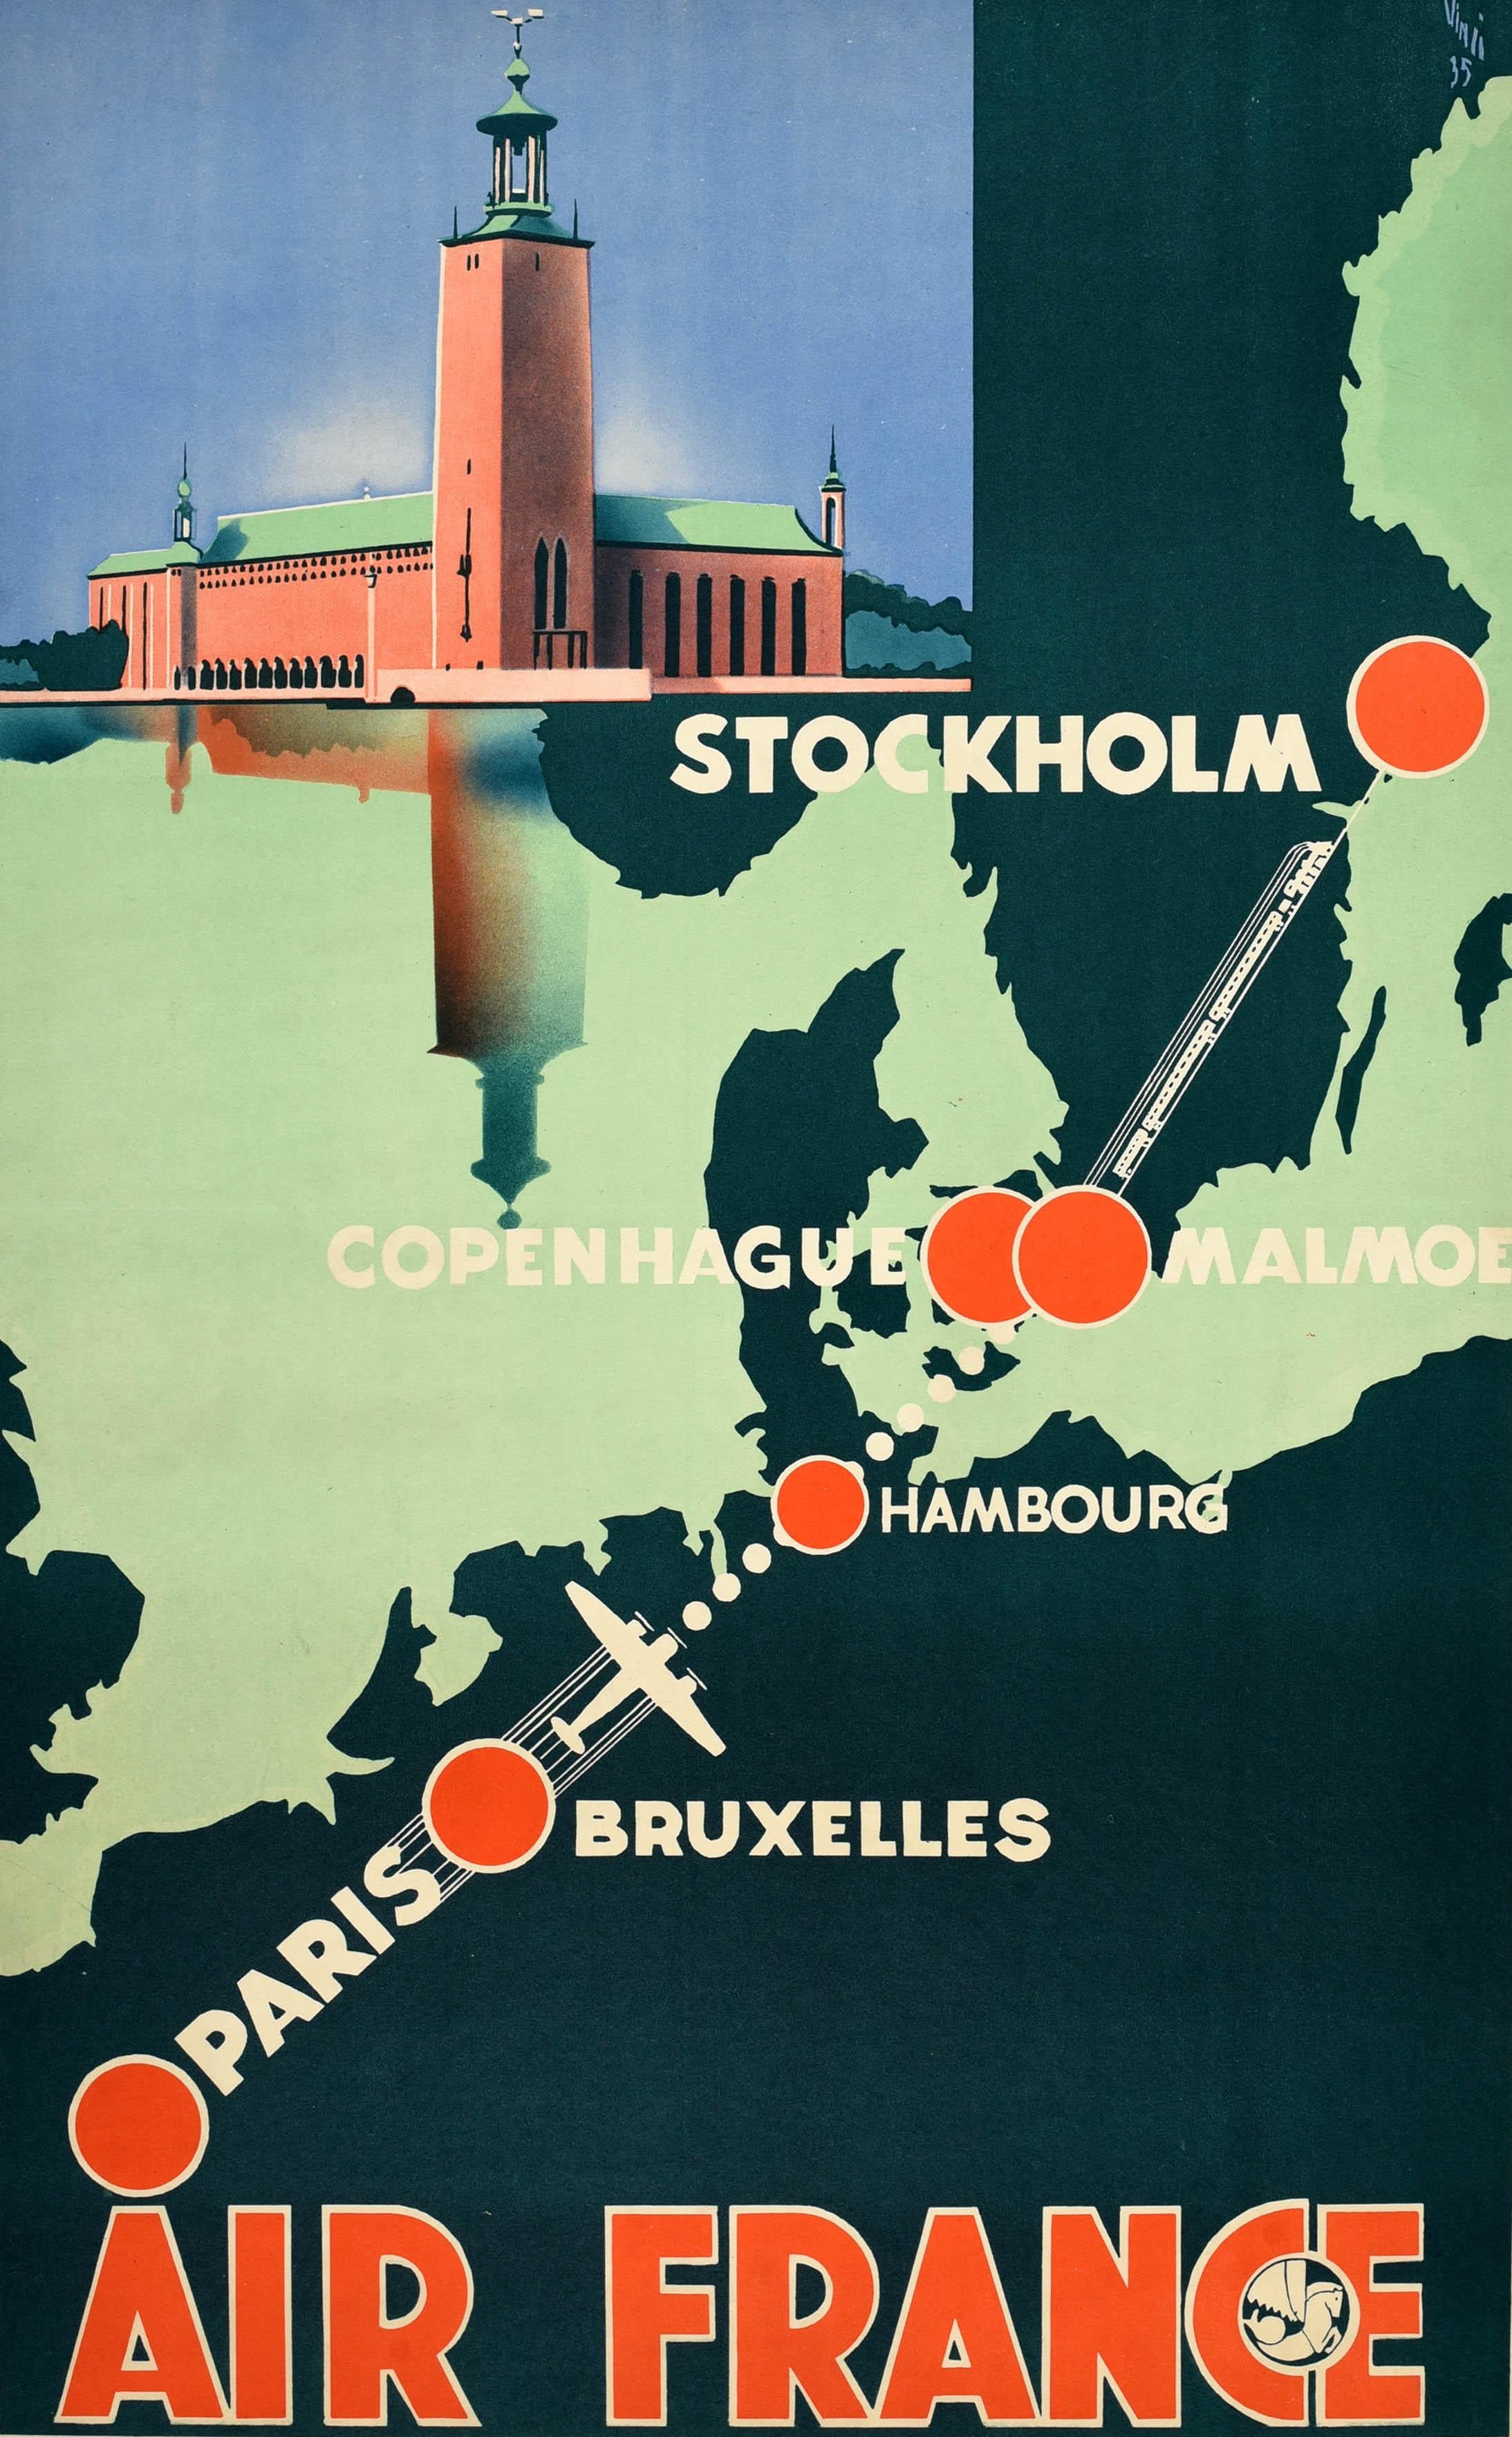 Original vintage travel poster for Air France promoting their Scandinavia flight route from Paris to Stockholm by plane and train via Brussels Hamburg Copenhagen and Malmo - featuring an Art Deco design showing the cities marked on a map of the